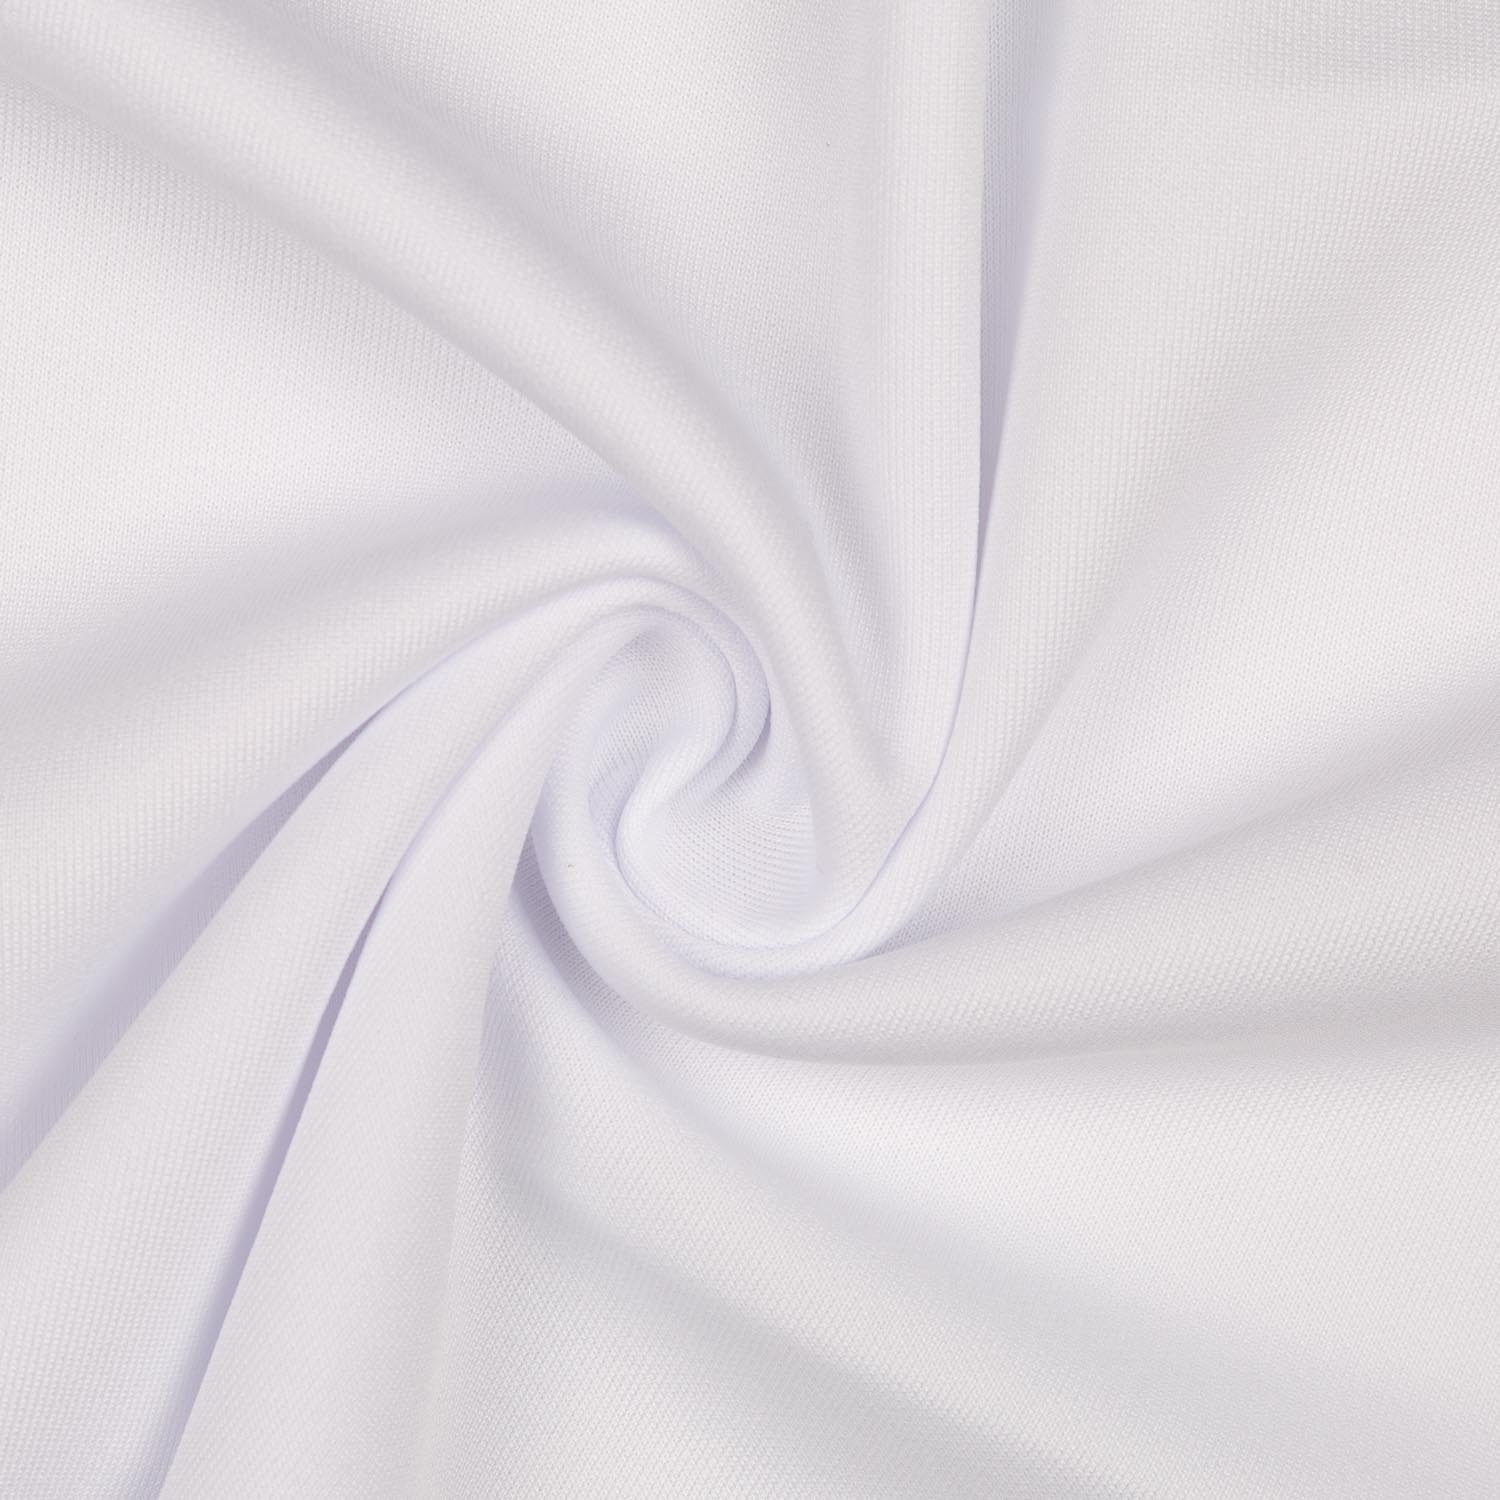 How Are Polyester and Microfiber Different From Each Other